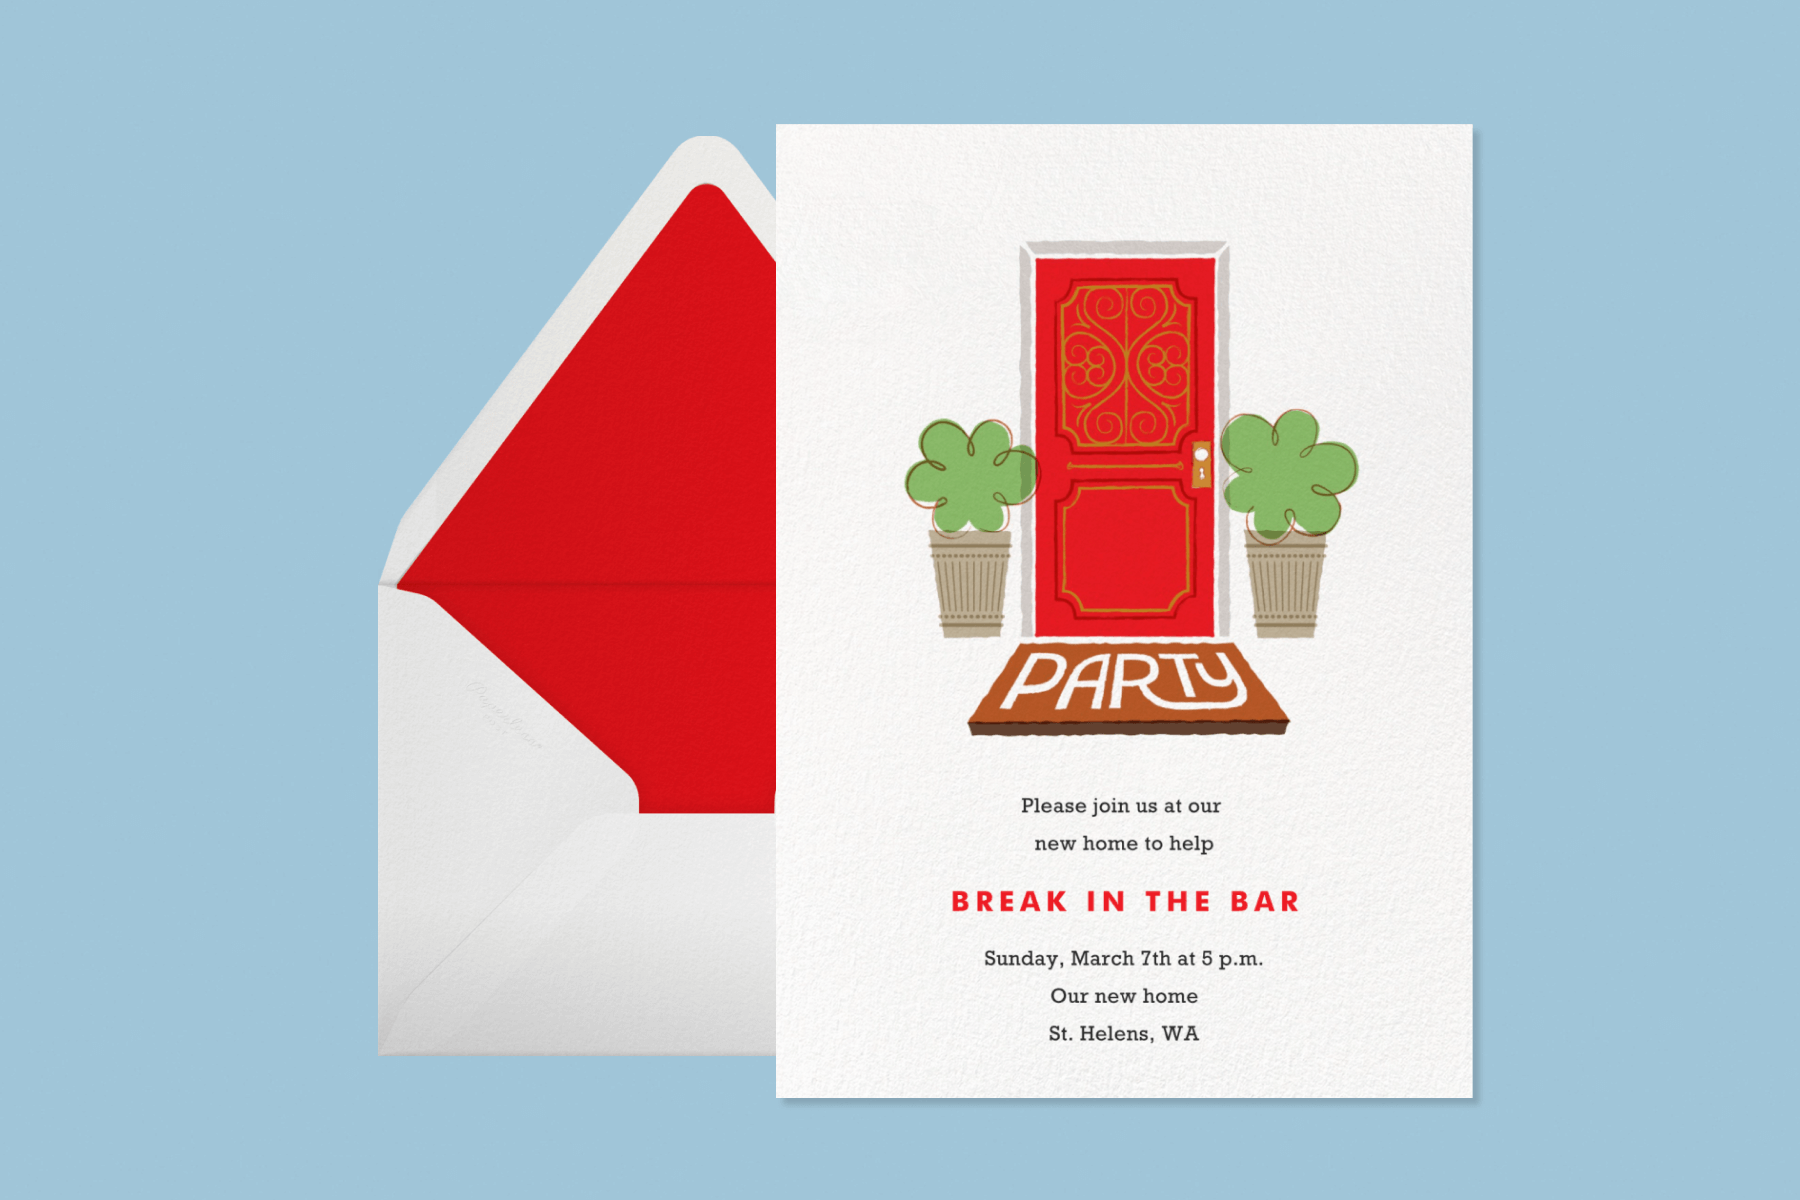 An invitation that reads “Break in the bar” with an illustration of a red door flanked by two potted shrubs and a doormat that says “Party.”